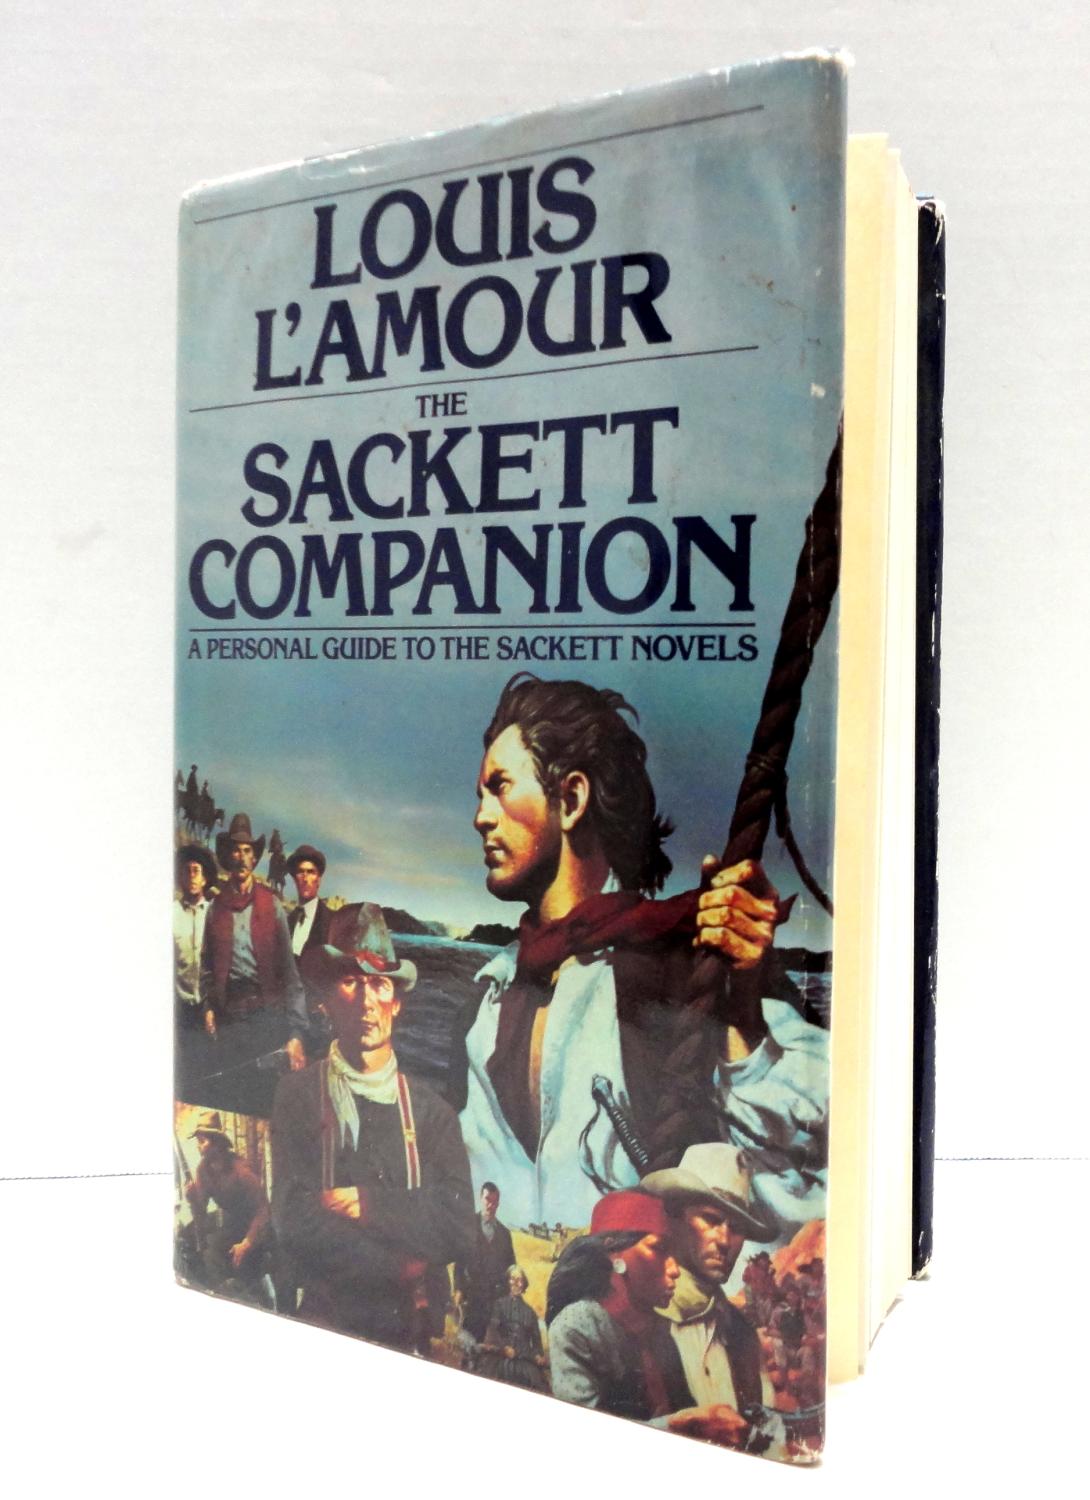 The Sackett Companion: A Personal Guide to the Sackett Novels [Book]